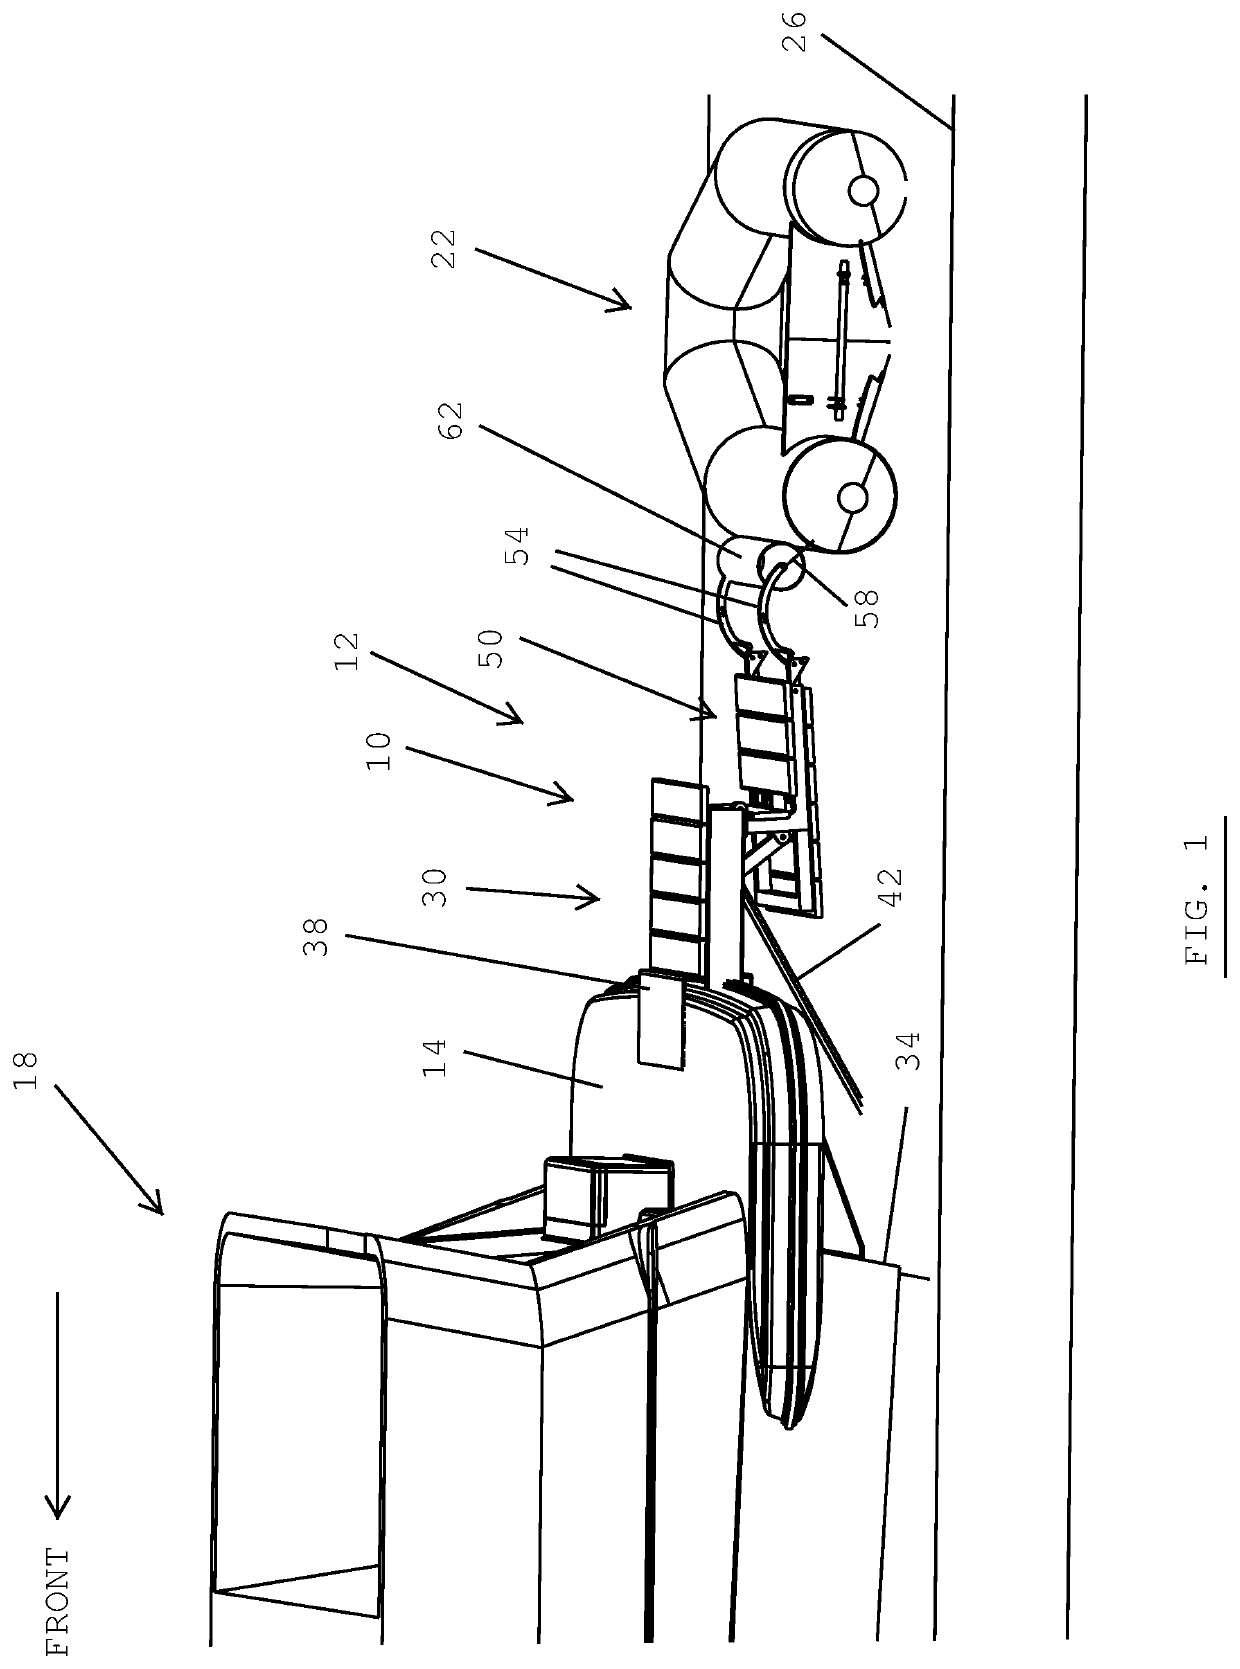 Watercraft boarding mechanism and method of use thereof